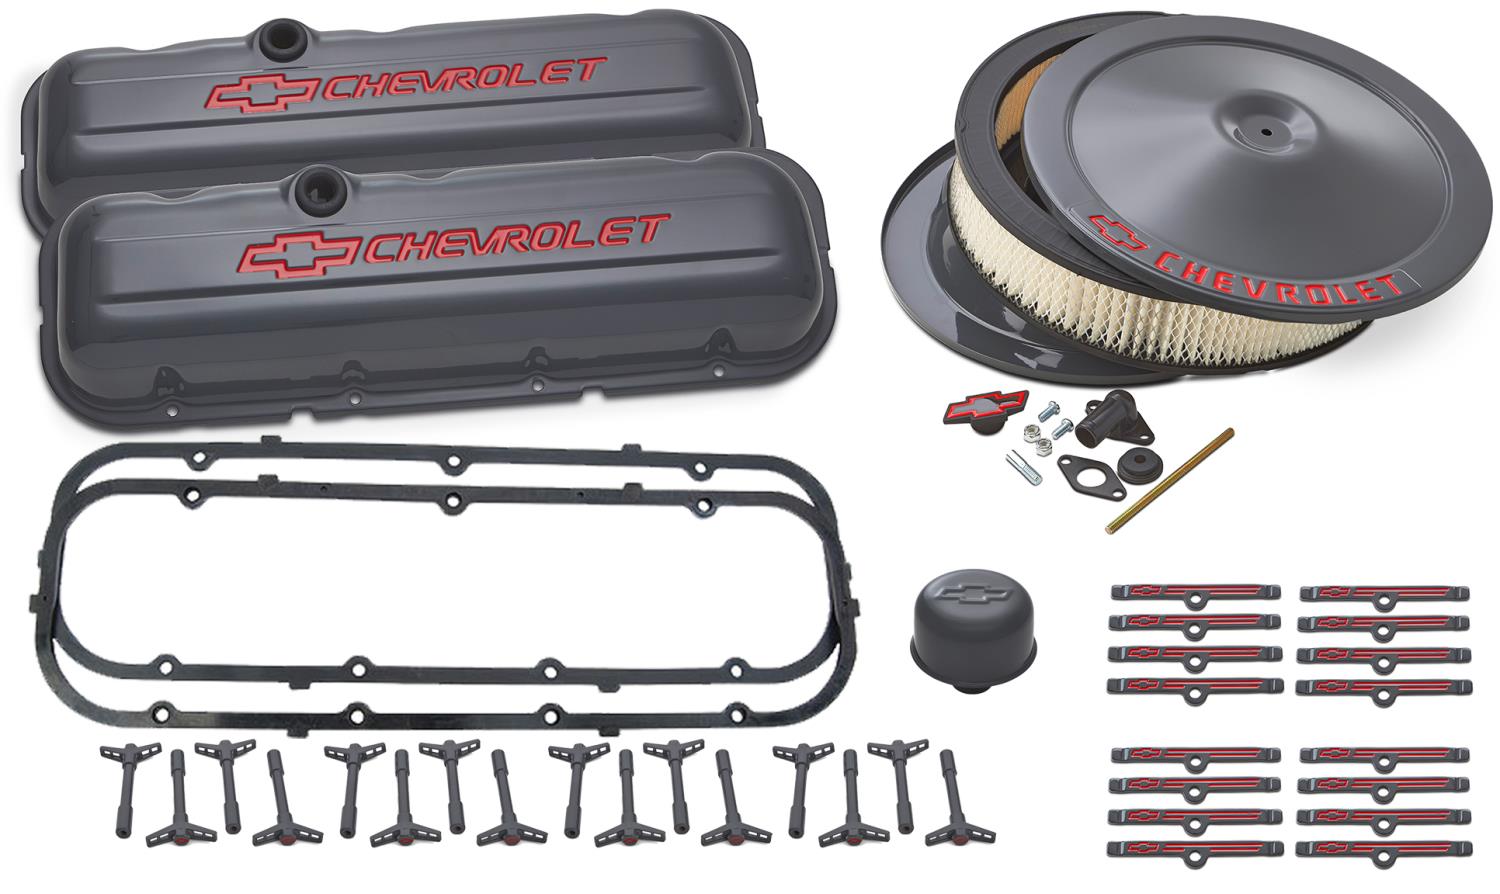 Stamped Steel Tall Valve Cover Dress-Up Kit for